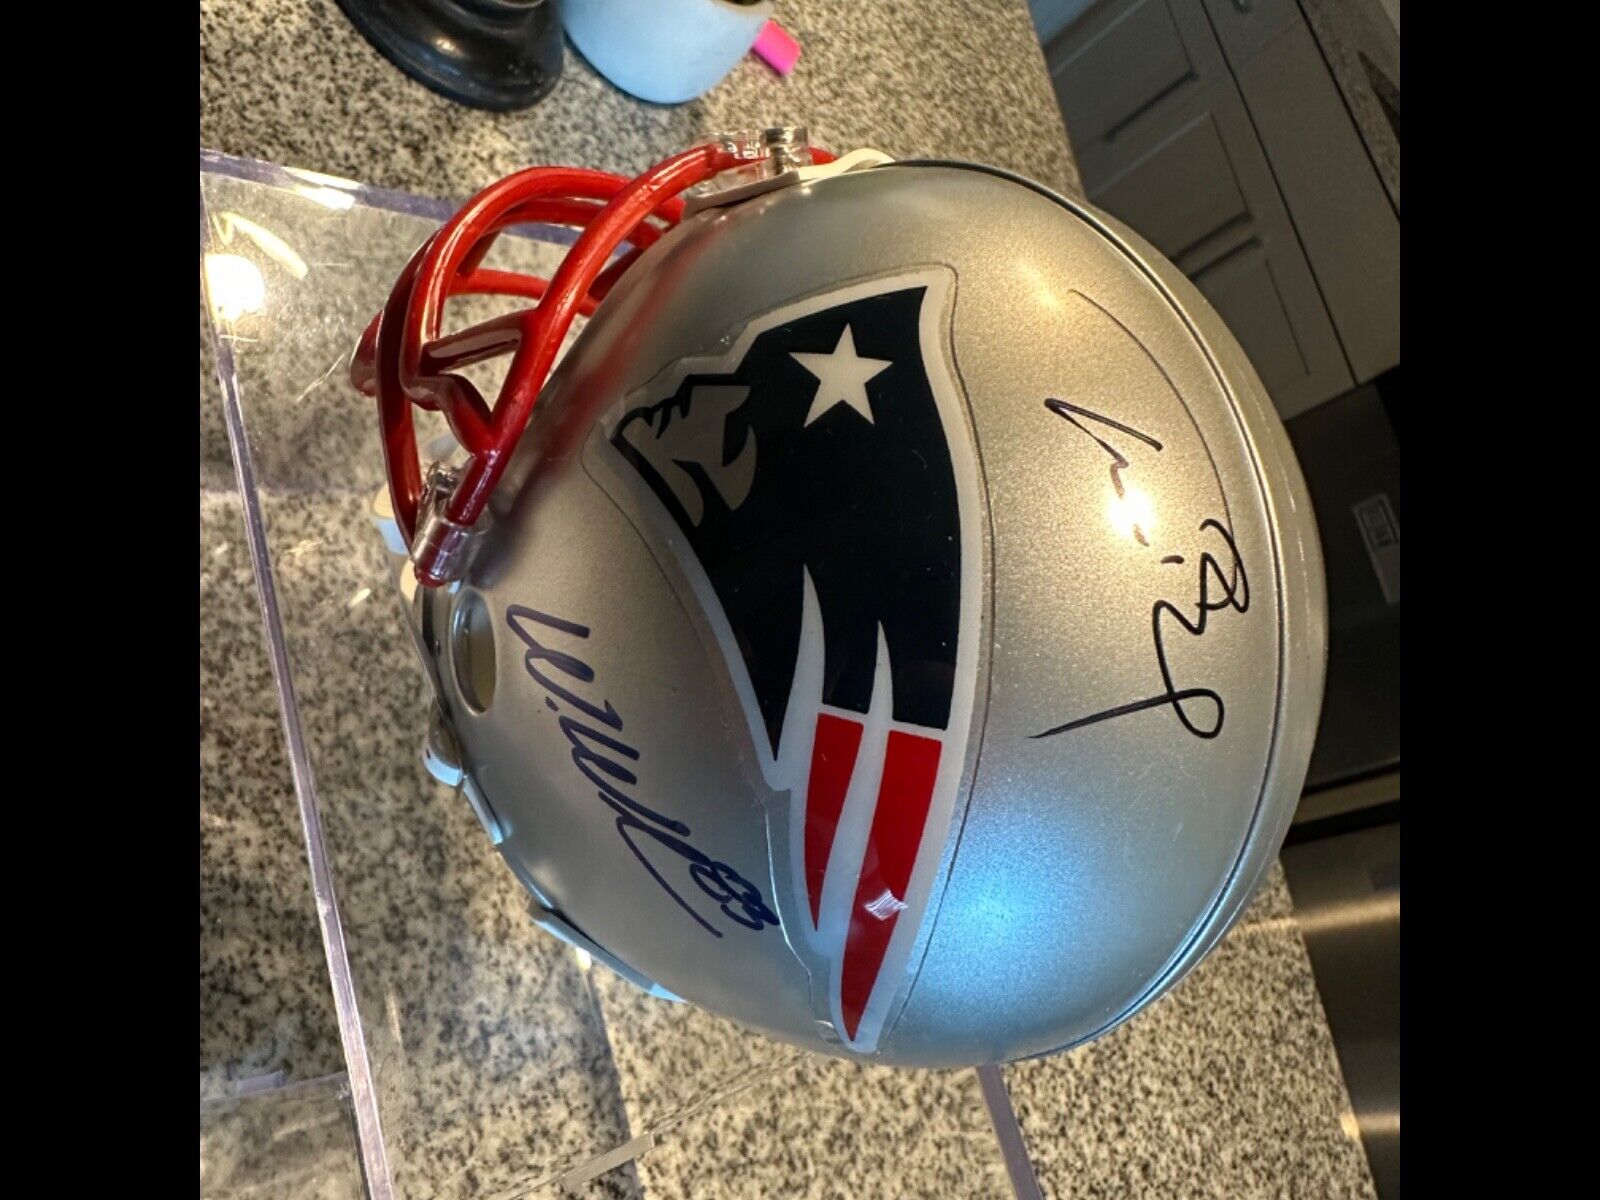 Signed Tom Brady/Wes Welker mini helmet. In perfect condition